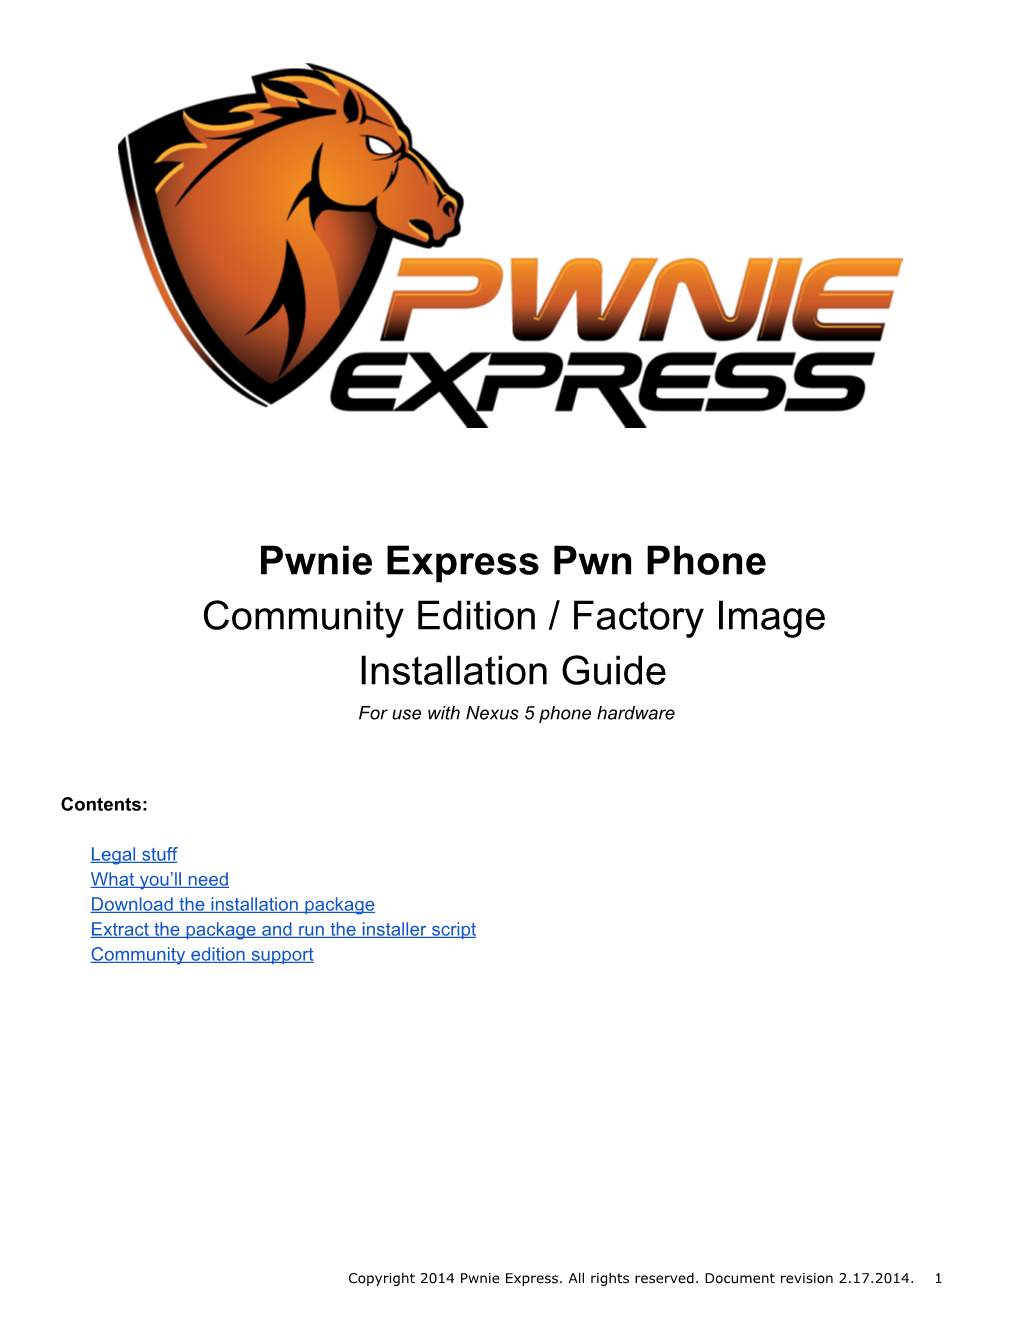 Pwnie Express Pwn Phone Community Edition / Factory Image Installation Guide for Use with Nexus 5 Phone Hardware